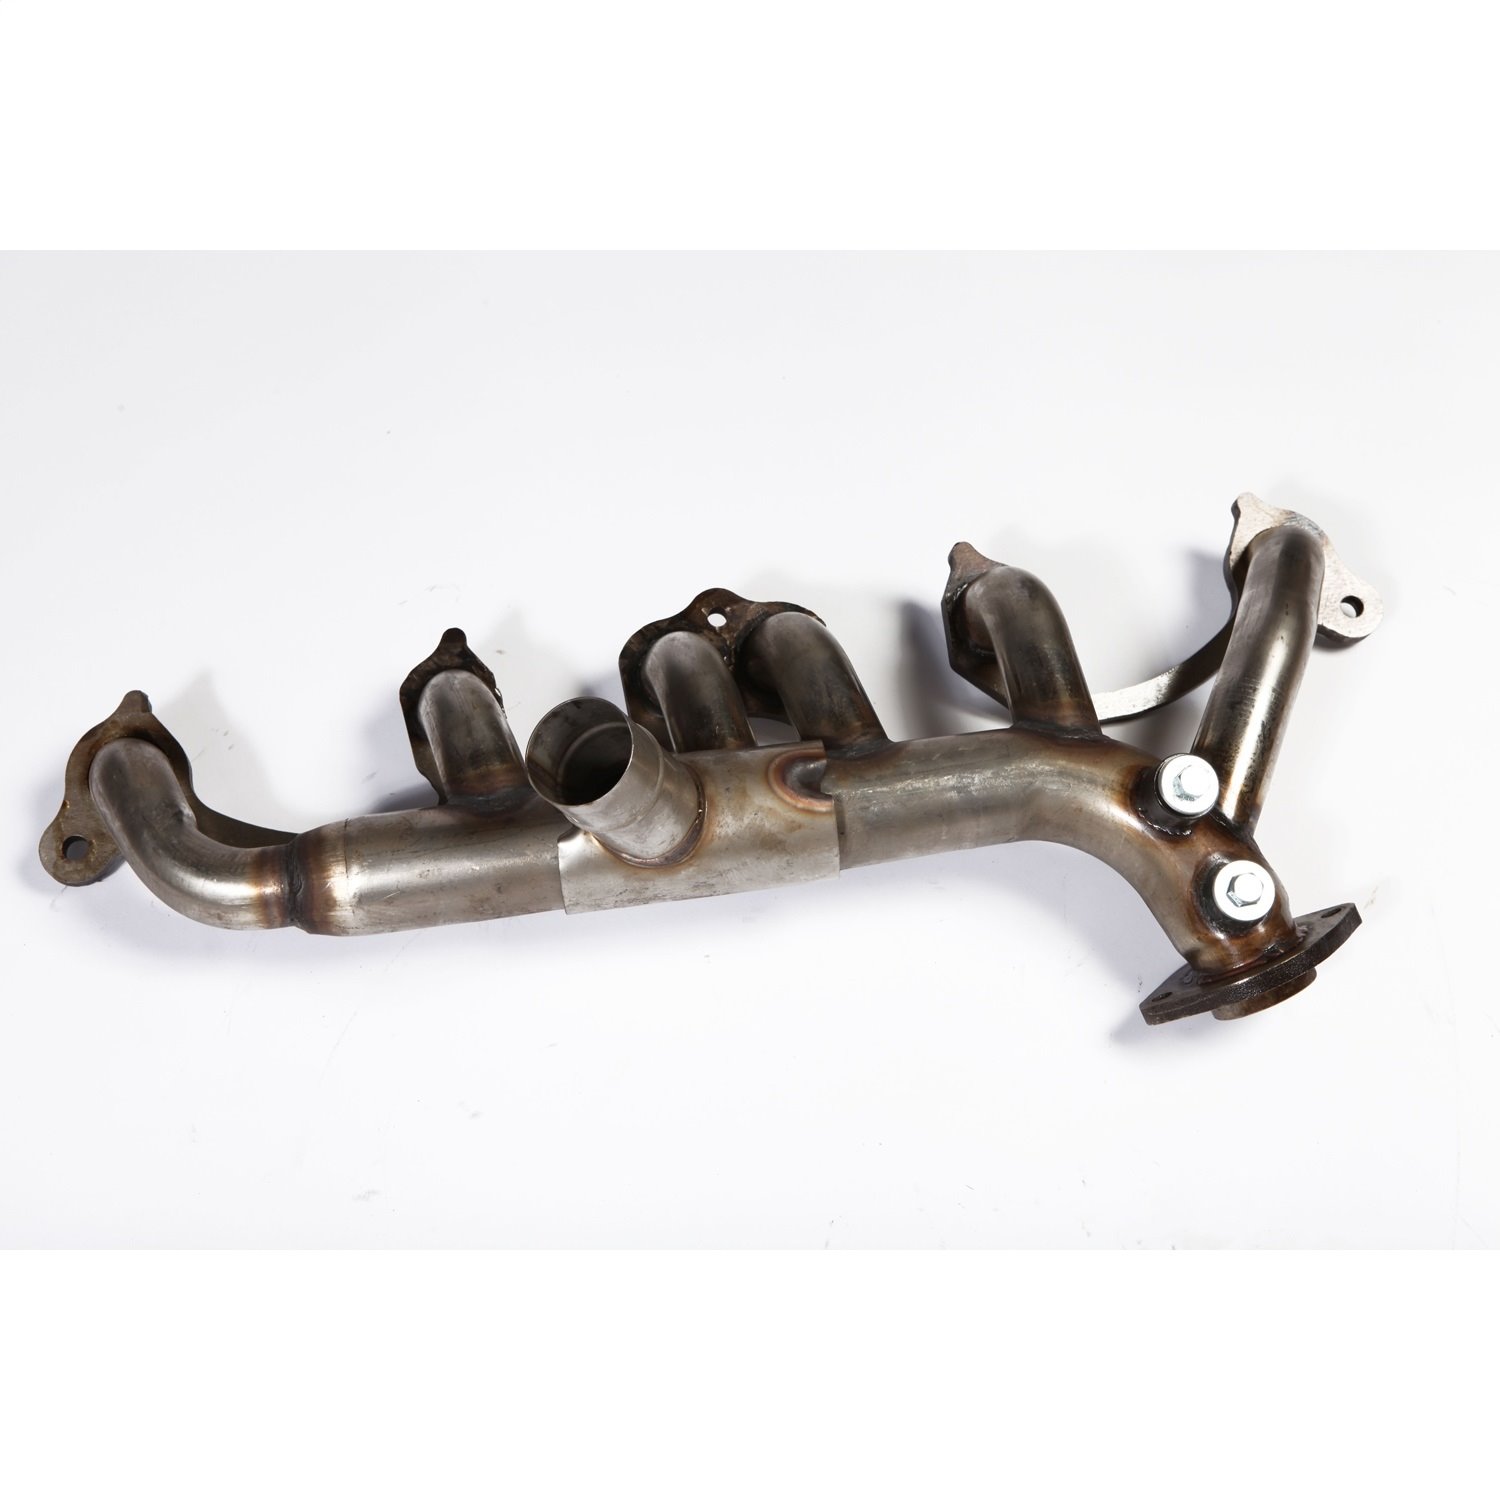 Replacement exhaust manifold from Omix-ADA, Fits 87-90 Cherokees with a 4.0 liter engine.